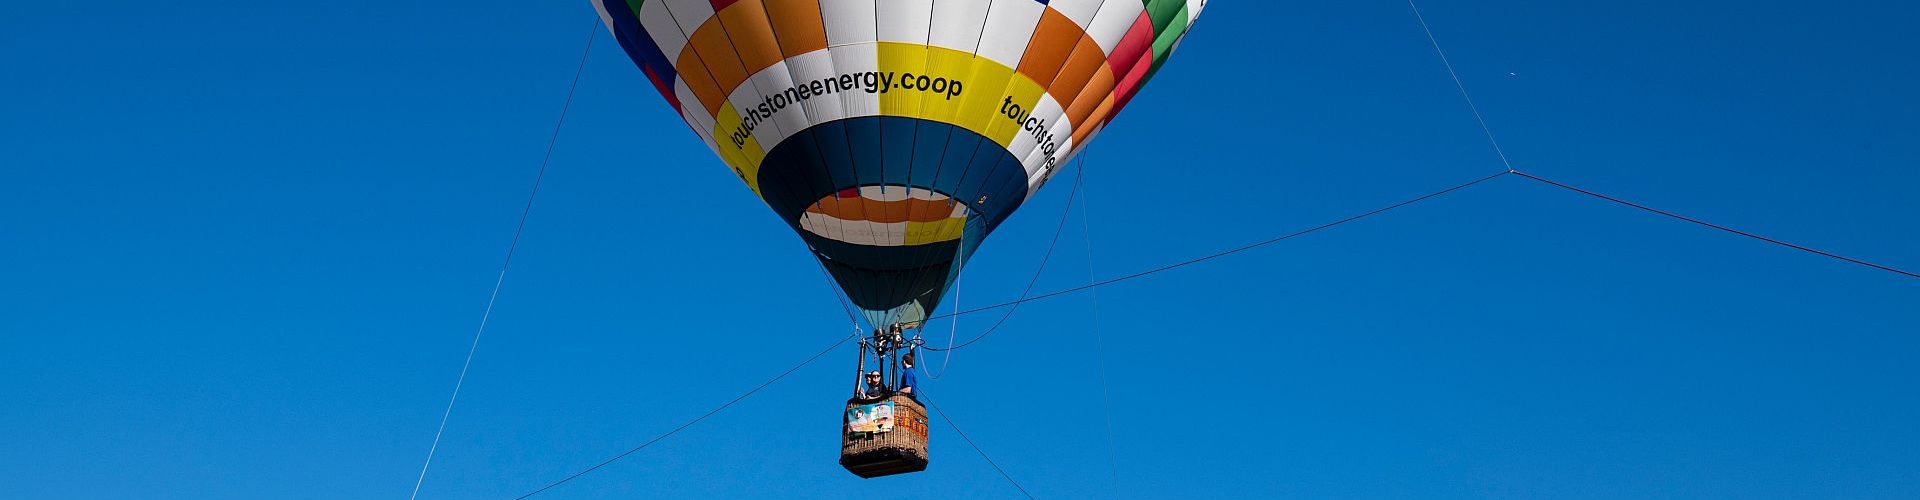 Touchstone Energy Hot Air Balloon at Special Olympics